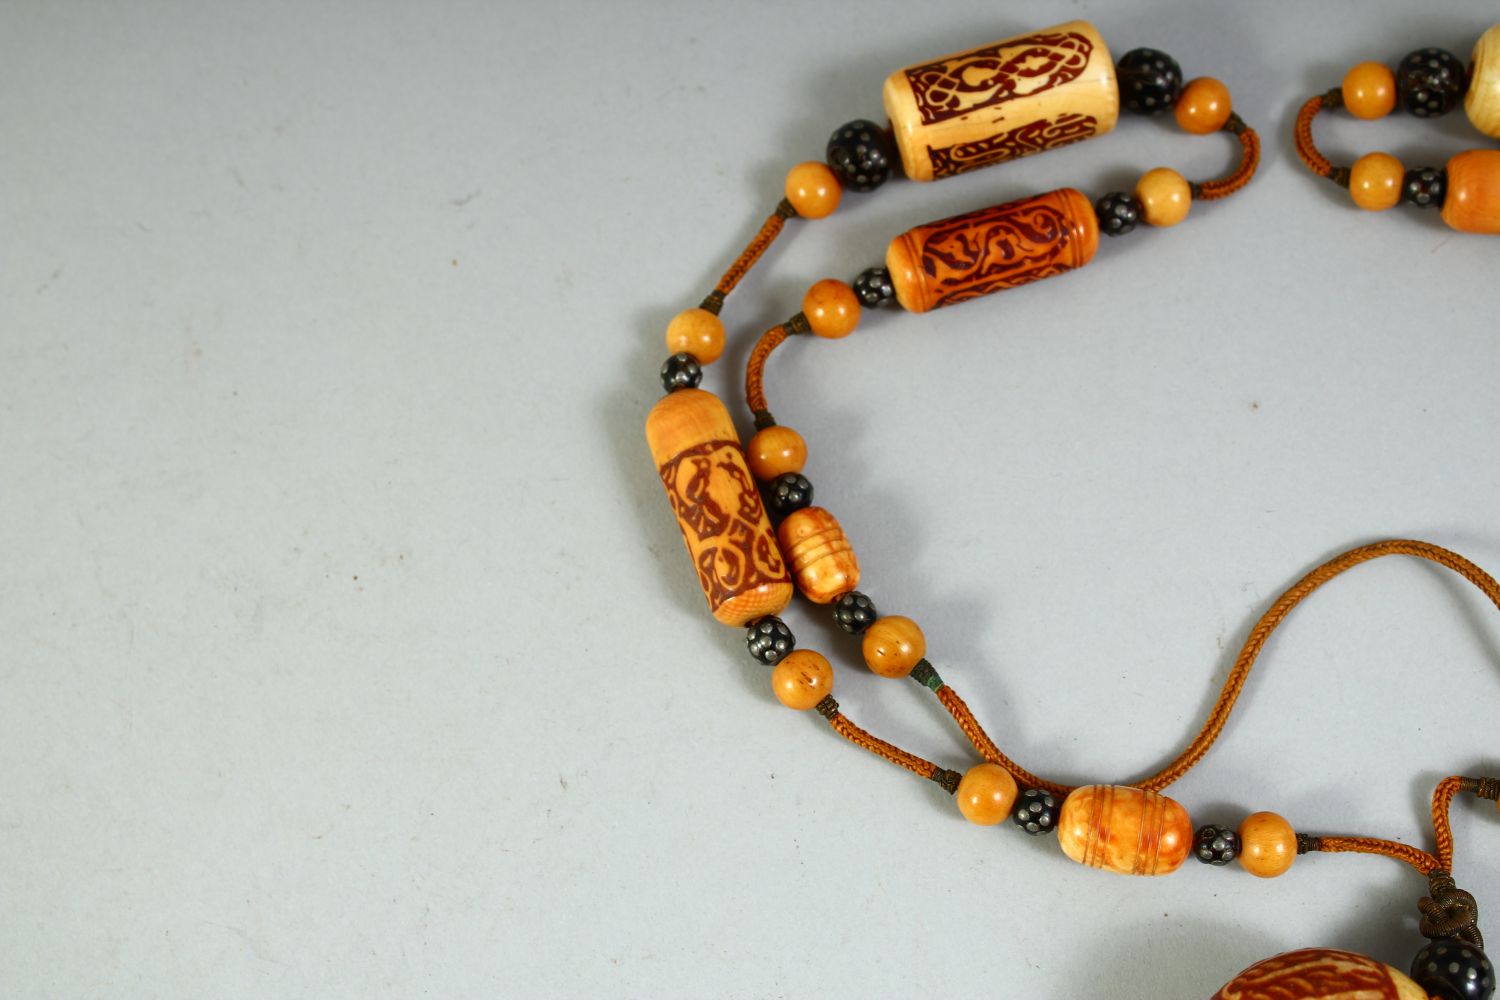 A RARE 18TH CENTURY OR EARLIER OTTOMAN IVORY, WALRUS AND BLACK CORAL BEADED NECKLACE. - Image 5 of 6